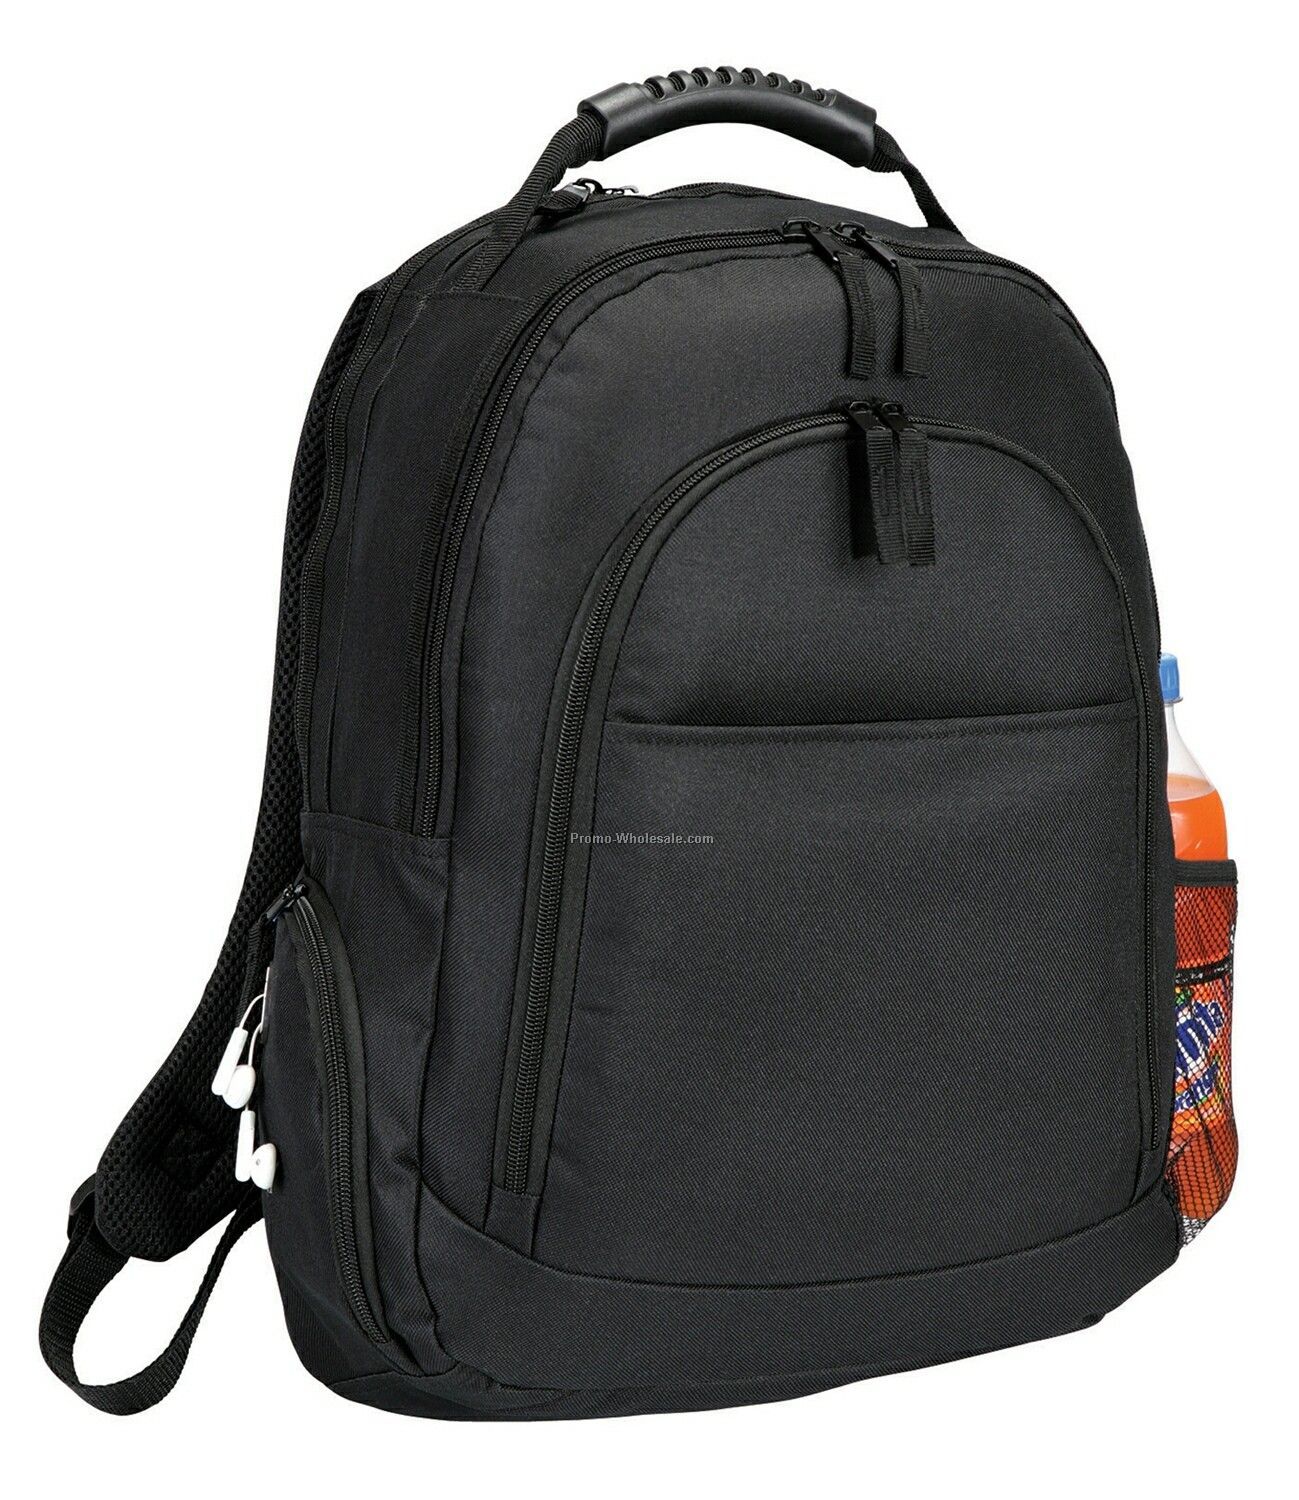 The Journey Laptop Backpack